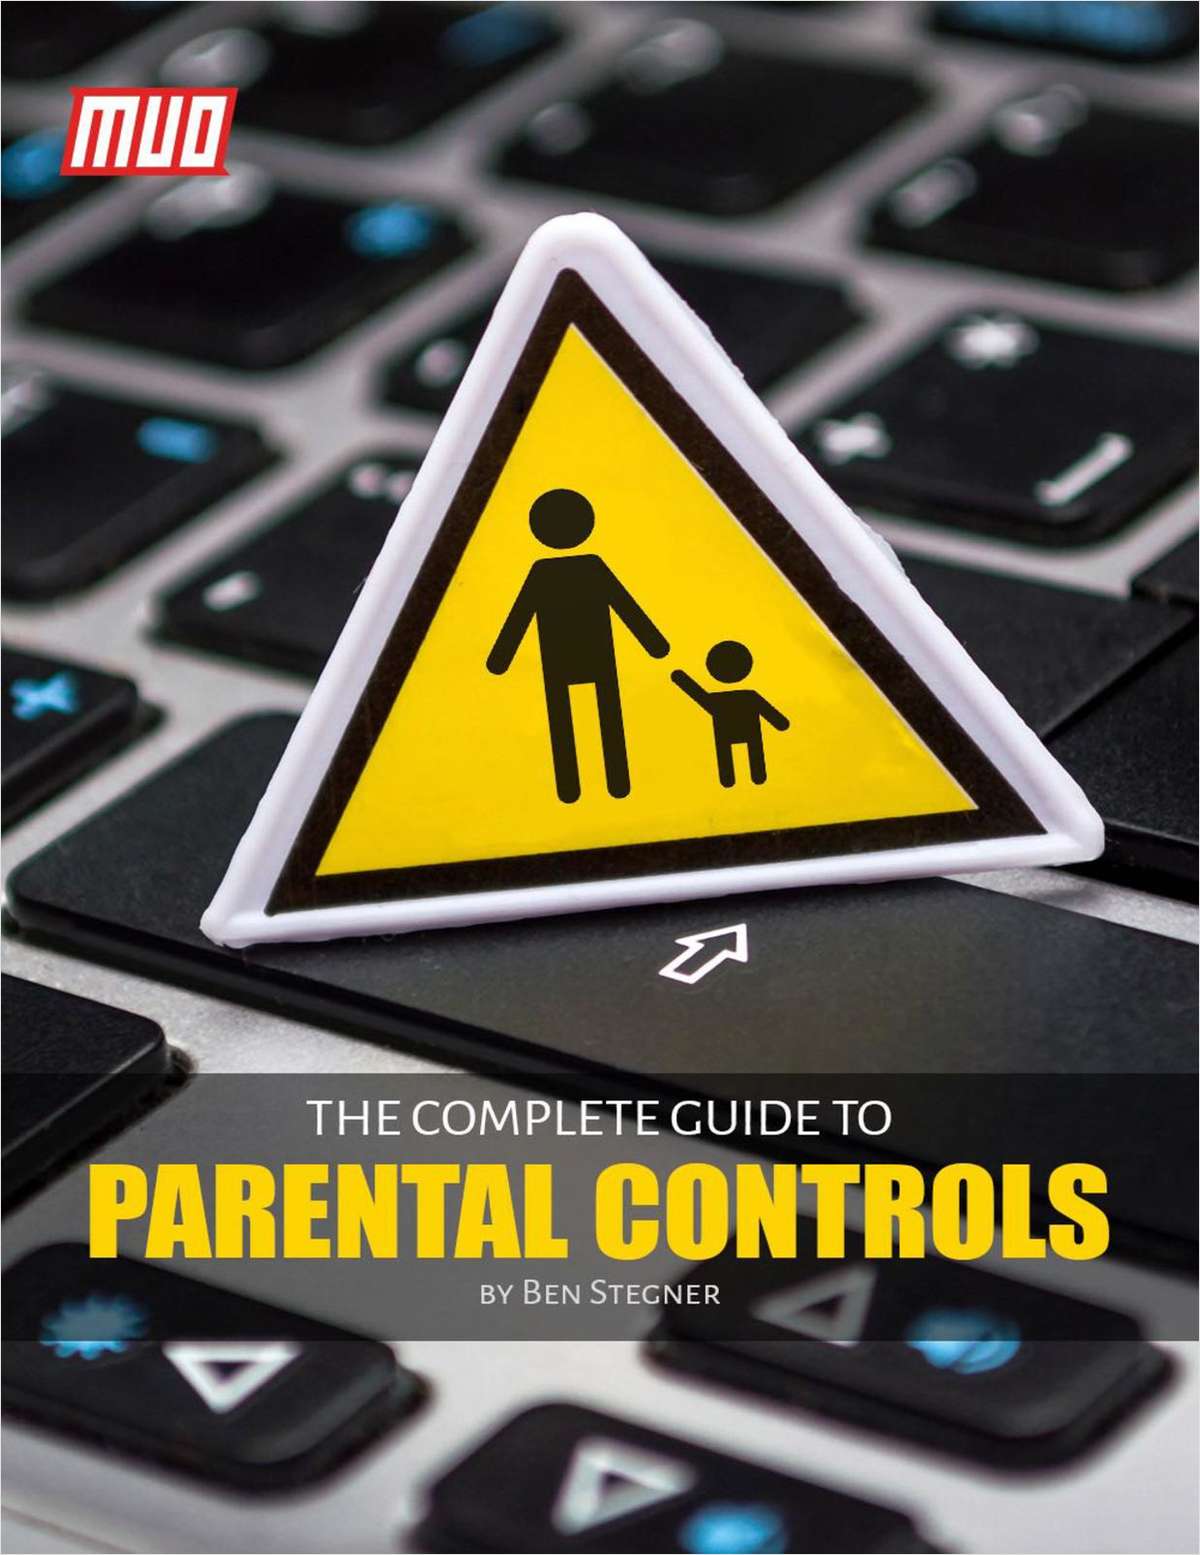 The Complete Guide to Parental Controls